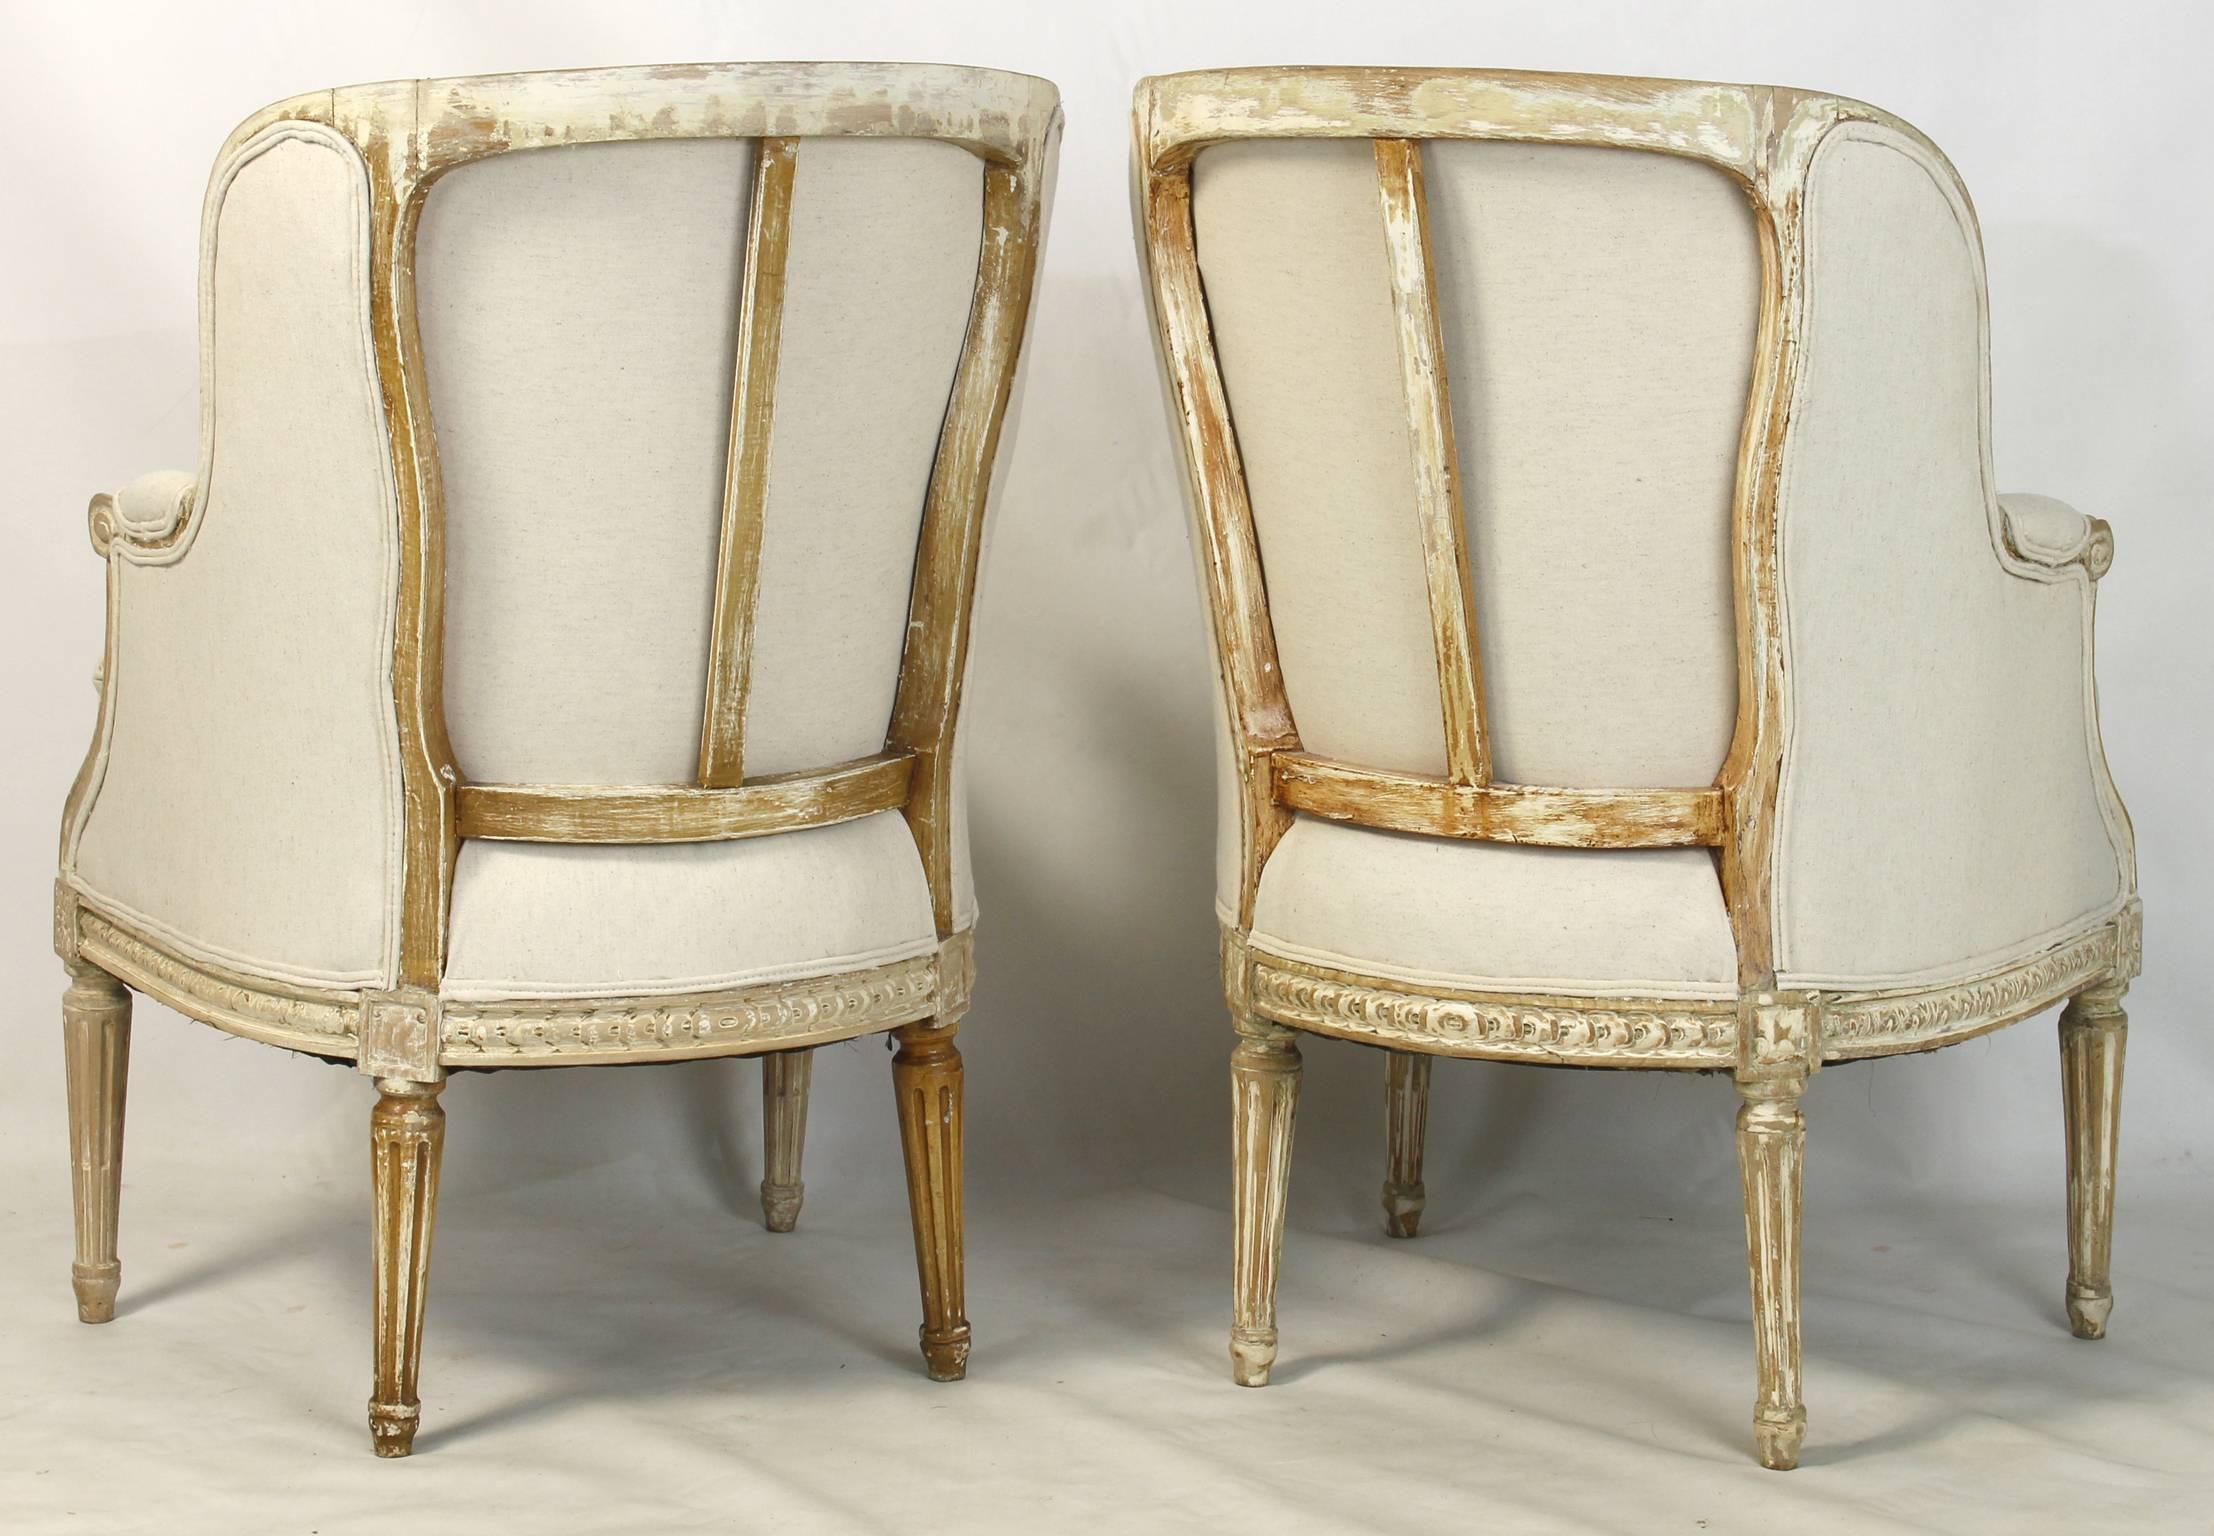 Pair of 19th Century French Bergeres or Armchairs In Excellent Condition For Sale In Kilmarnock, VA